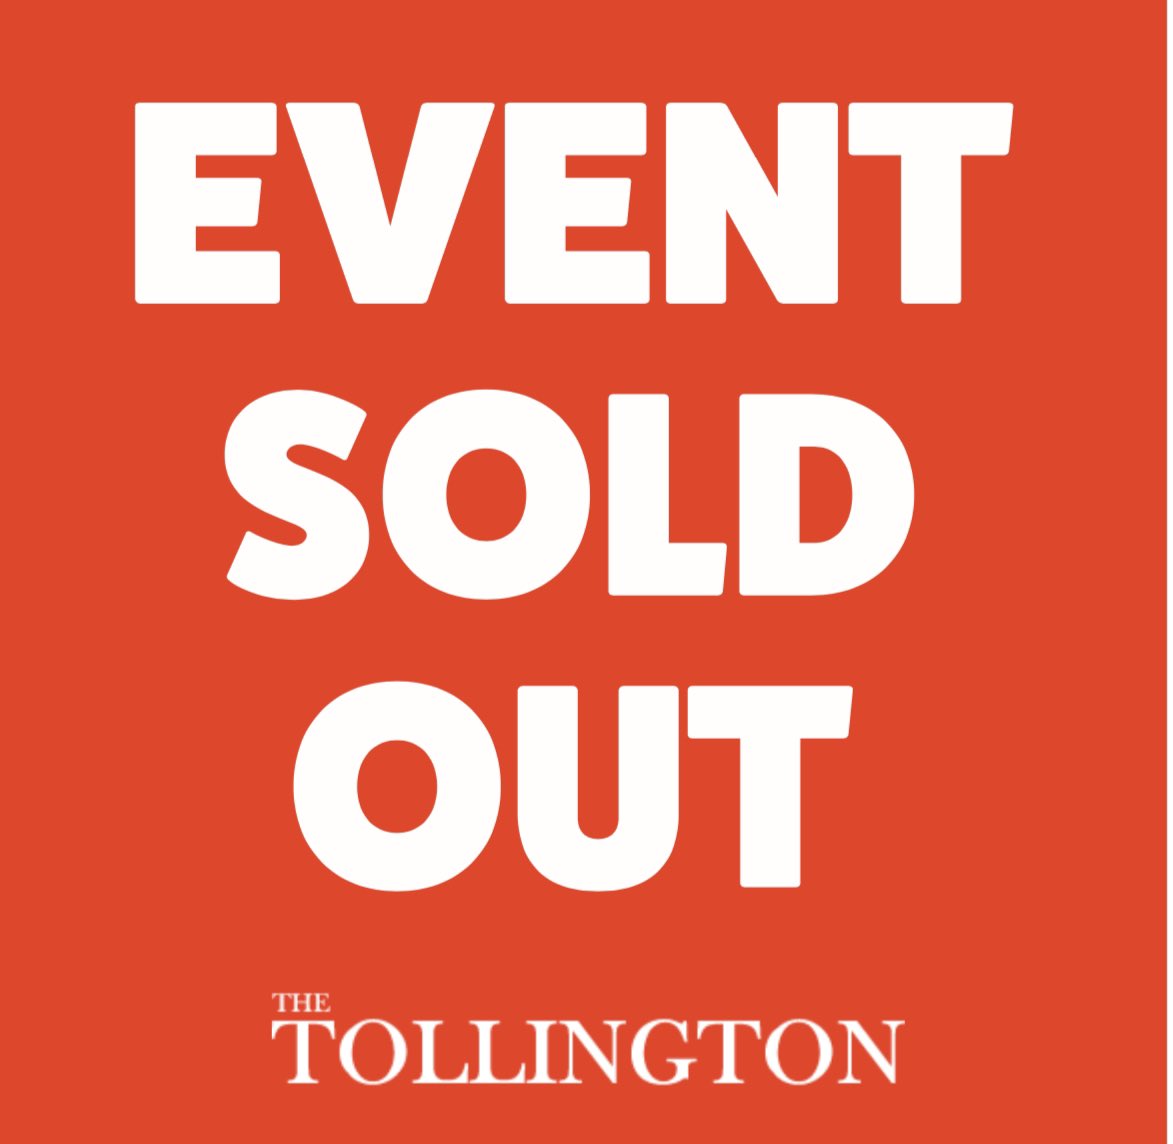 All tickets for Sunday have been sold out! Quicker than even we thought. Big apologies to anyone who didn’t manage to get down to get one. Sadly a capacity is a capacity and we can’t build an extension! Thanks for all the support, as always.